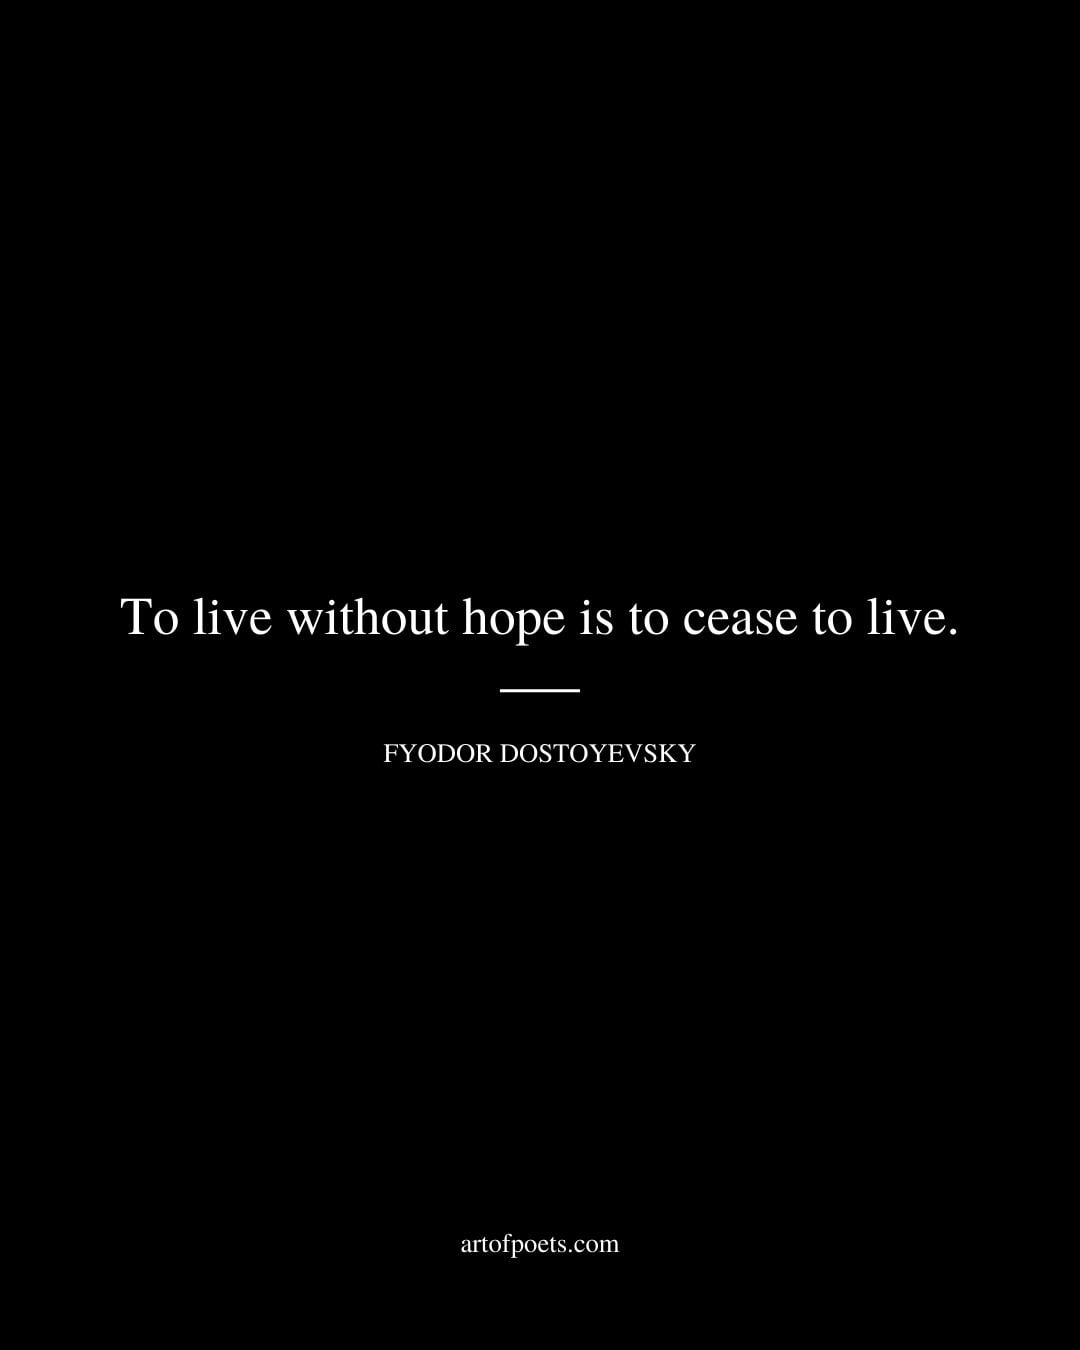 To live without hope is to cease to live. Fyodor Dostoyevsky